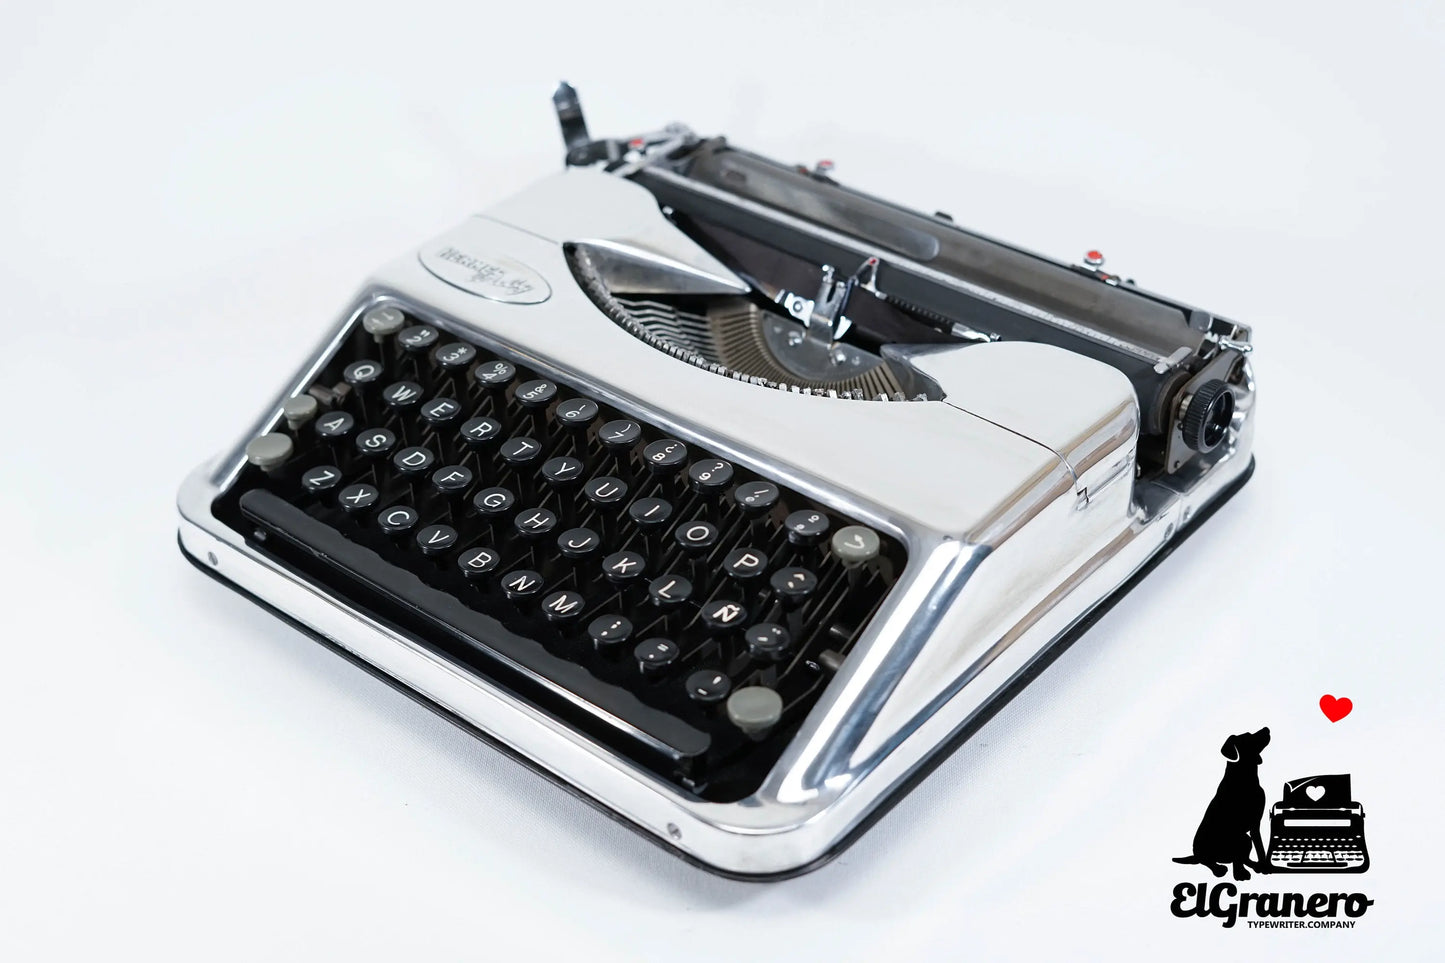 SALE! - Limited Edition Hermes Baby Polished Silver, Vintage, Mint Condition, Professionally Serviced - ElGranero Typewriter.Company